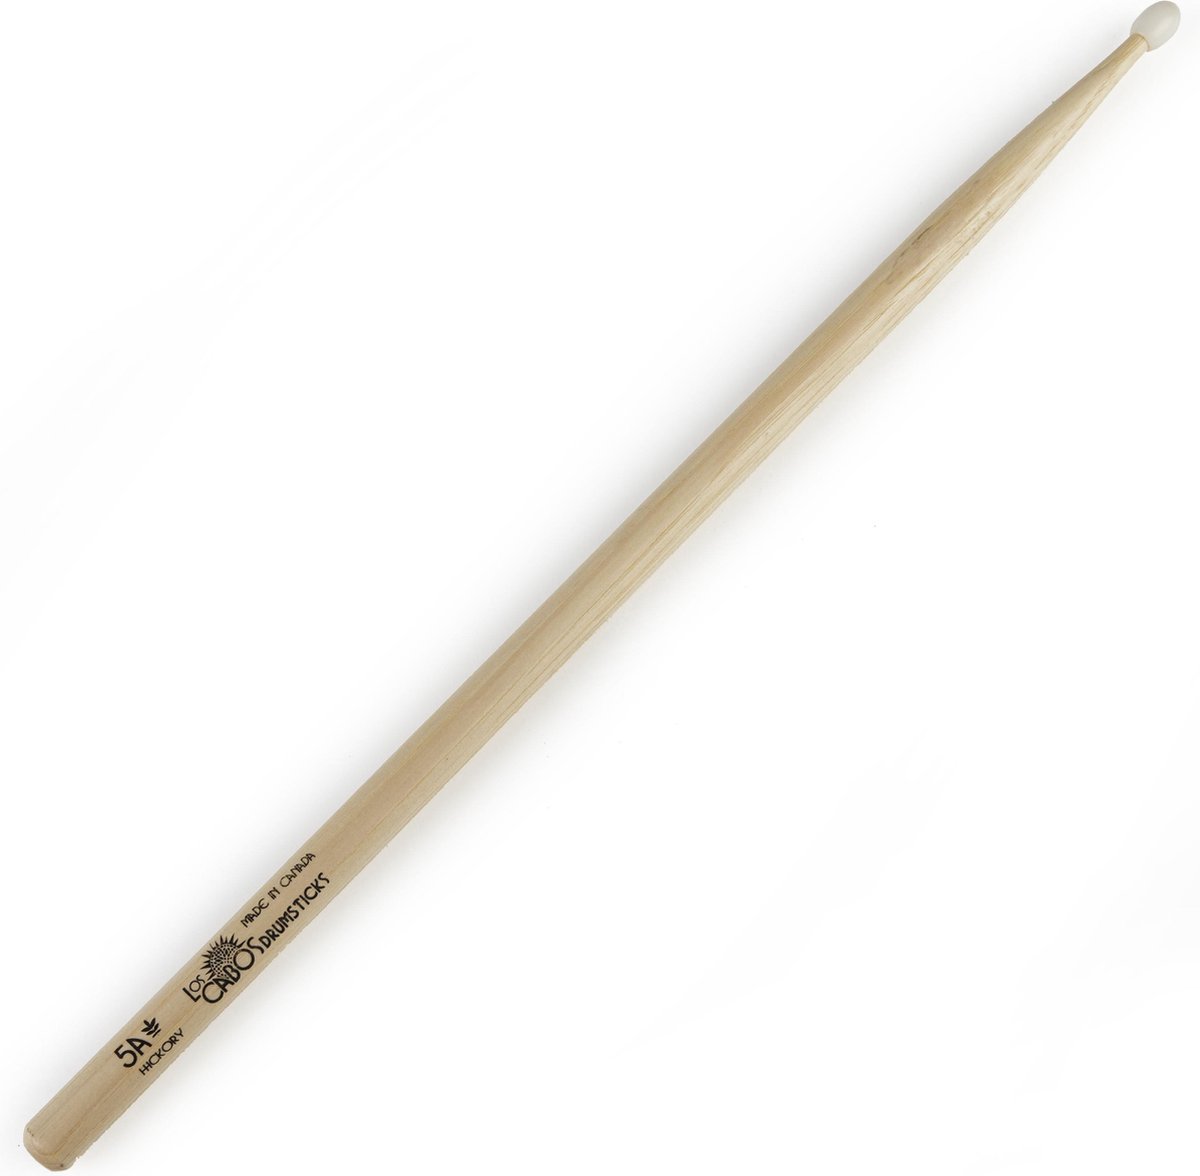 Los Cabos 5AN wit Hickory Sticks, Nylon Tip - Drumsticks